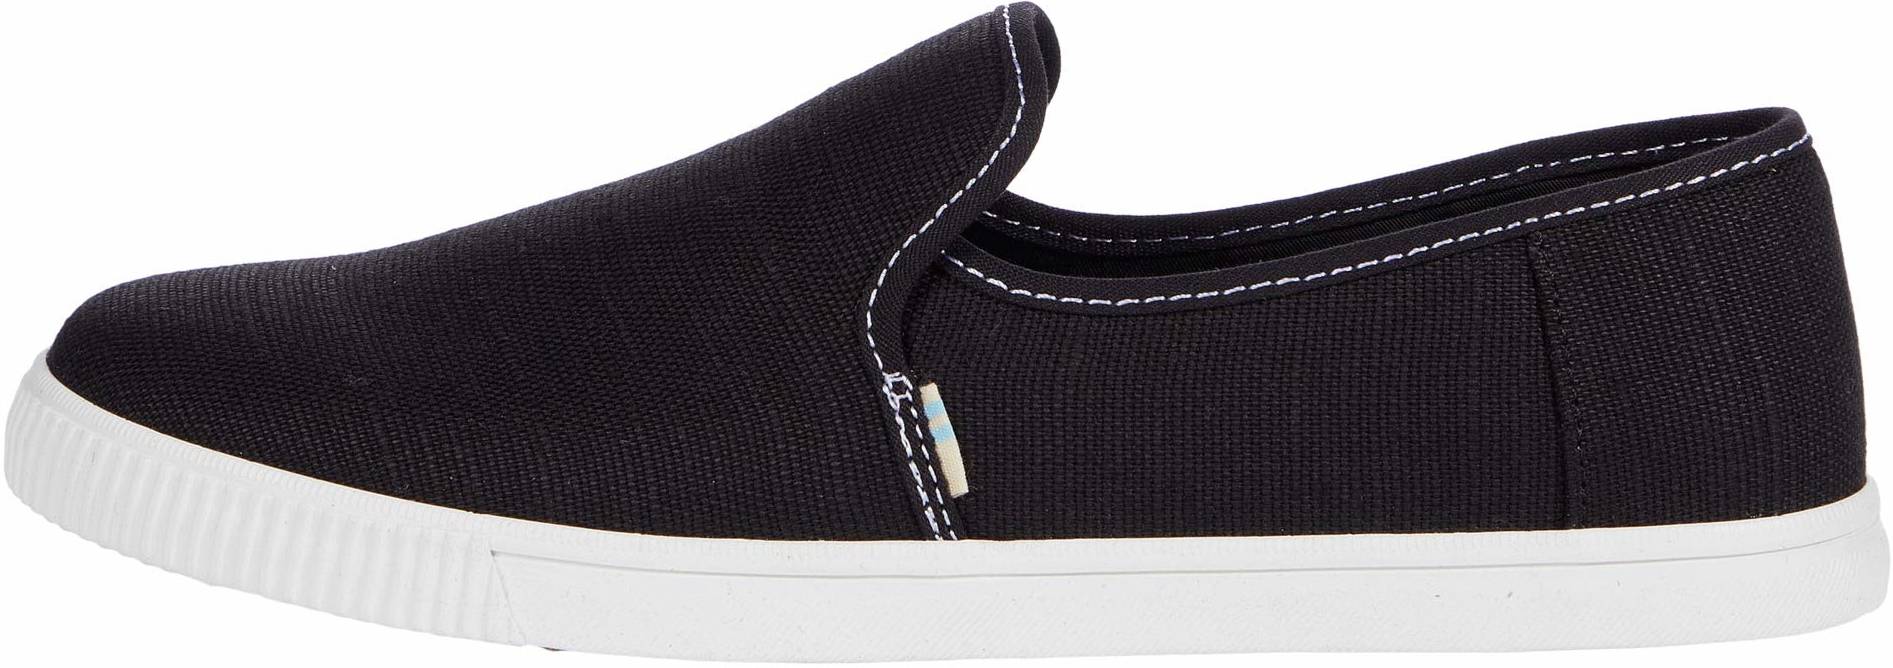 TOMS Clemente Slip-On sneakers in 10 colors (only $31) | RunRepeat